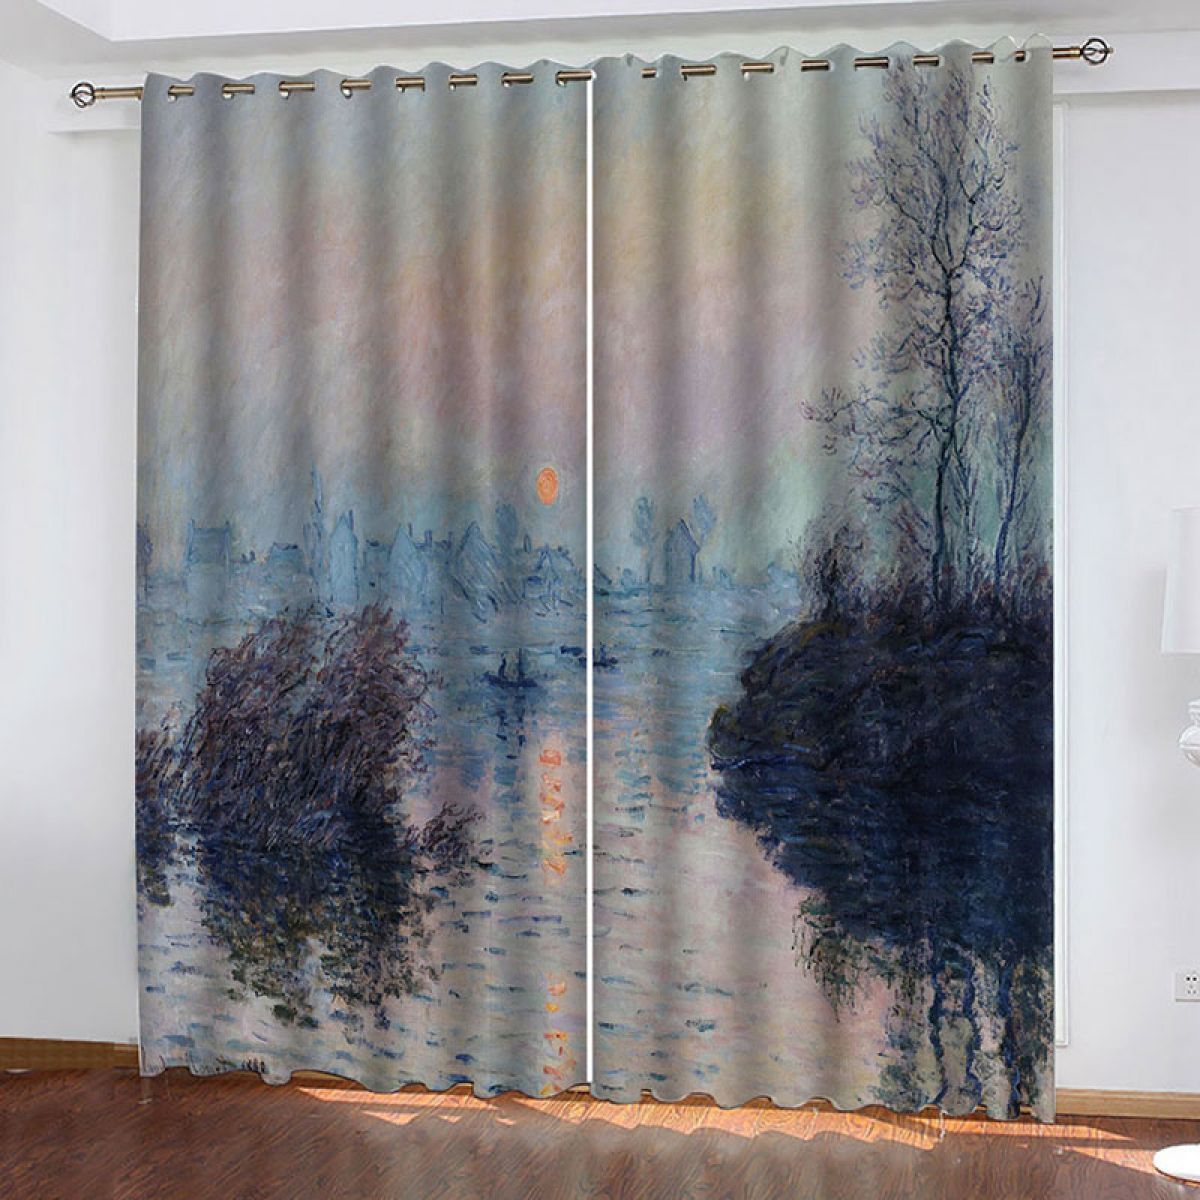 Oil Painting Of River Landscape Printed Window Curtain Home Decor